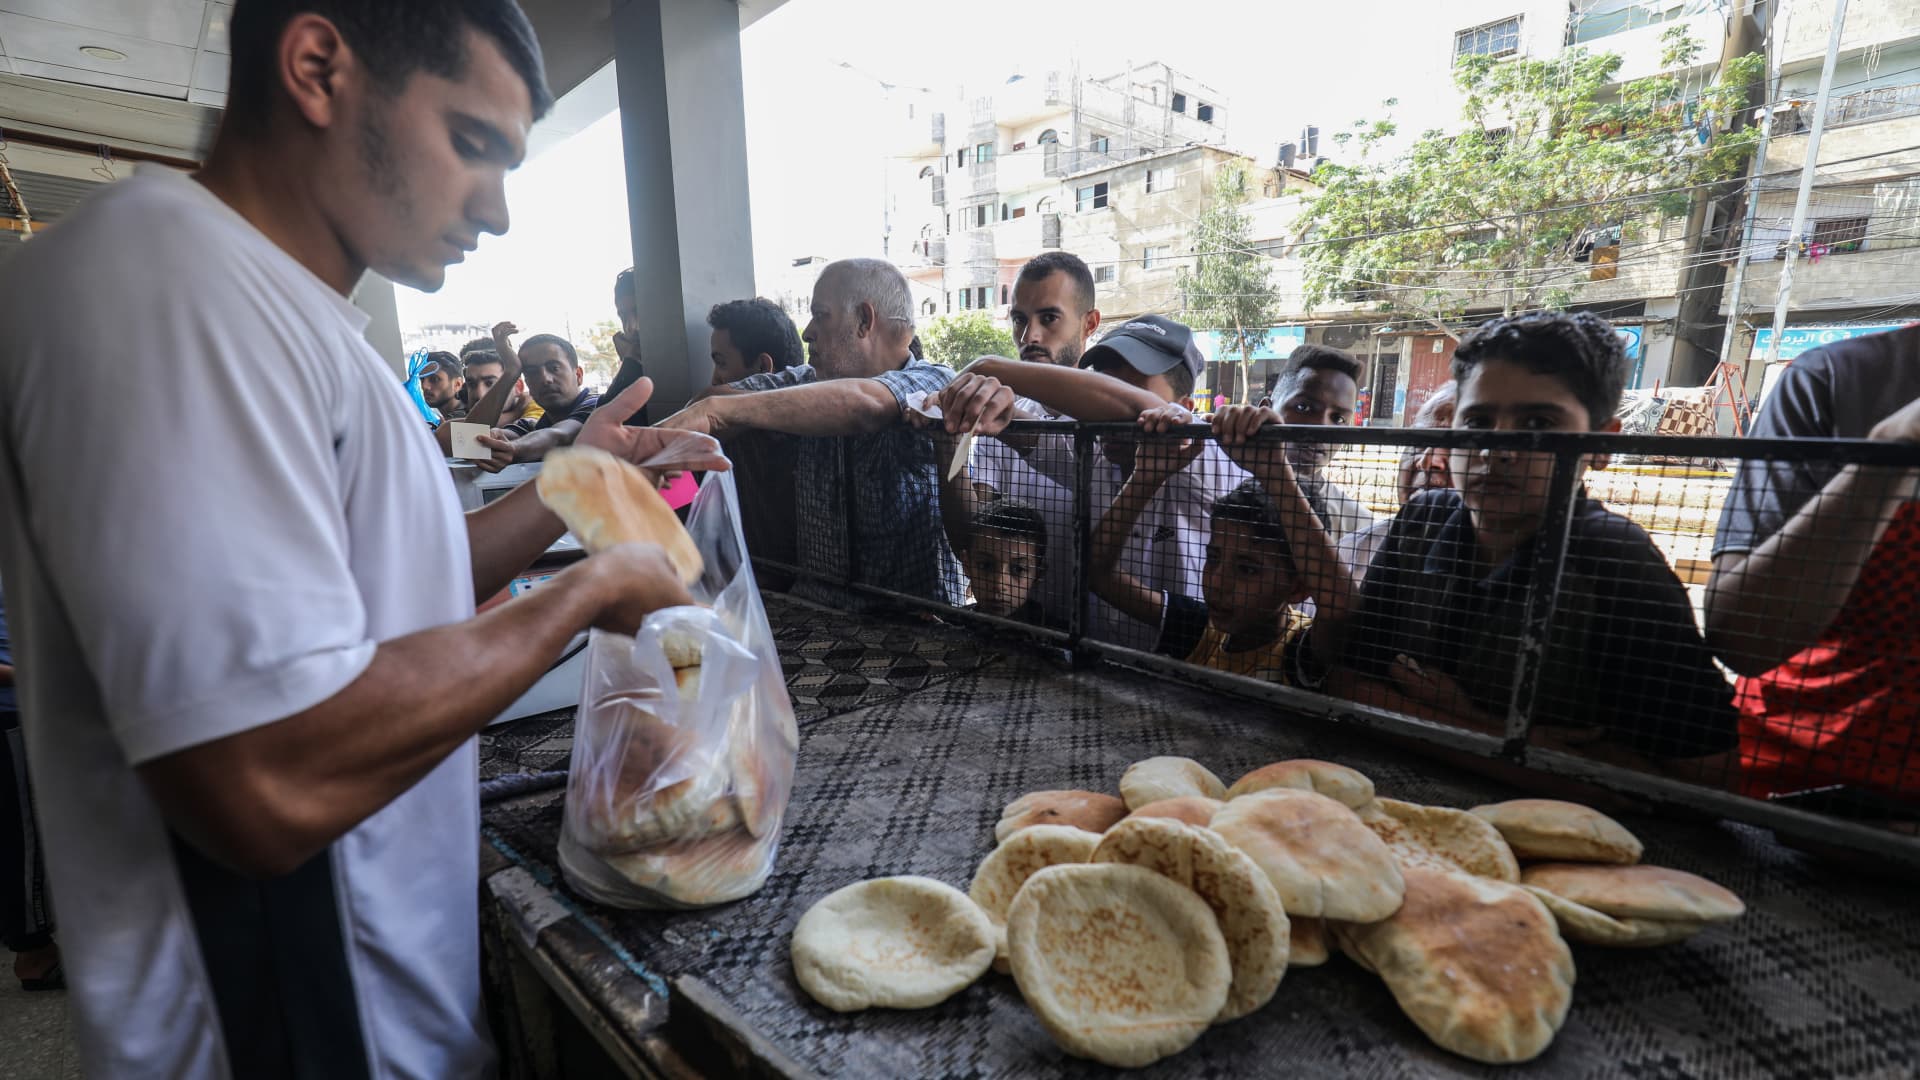 GAZA CITY, GAZA - OCTOBER 14: Palestinians line up in front of a bakery to buy bread as Israeli airstrikes continue on the 8th day in Gaza City, Gaza on October 14, 2023. Palestinians are trying to survive in an area without electricity, water, food and fuel. (Photo by Abed Rahim Khatib/Anadolu via Getty Images)